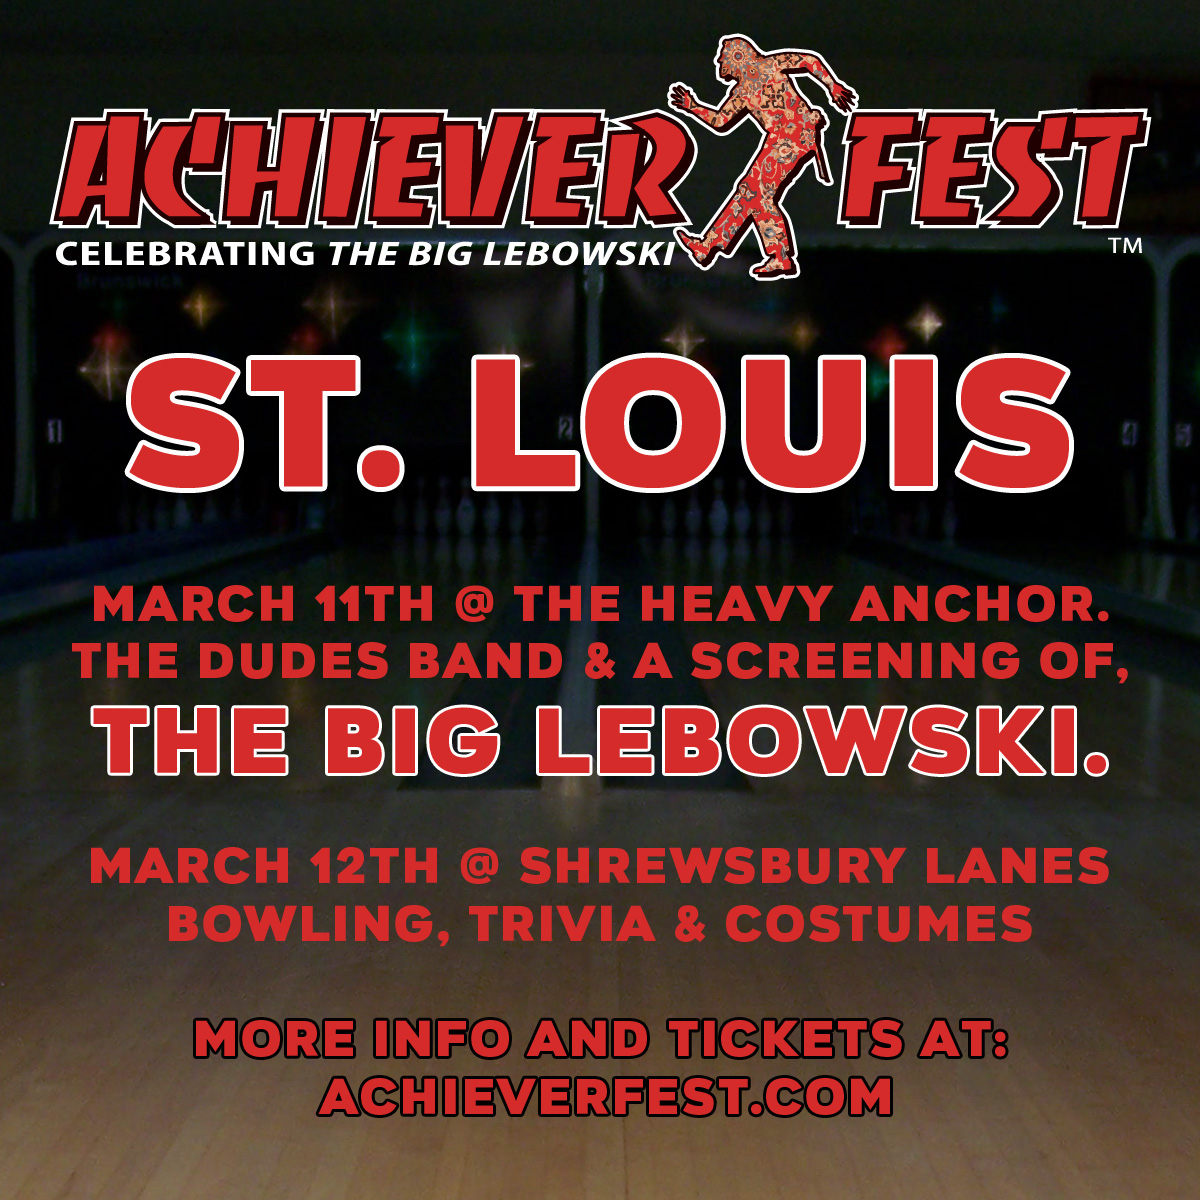 Flyer for Achiever Fest St. Louis which will include a screening of The Big Lebowski